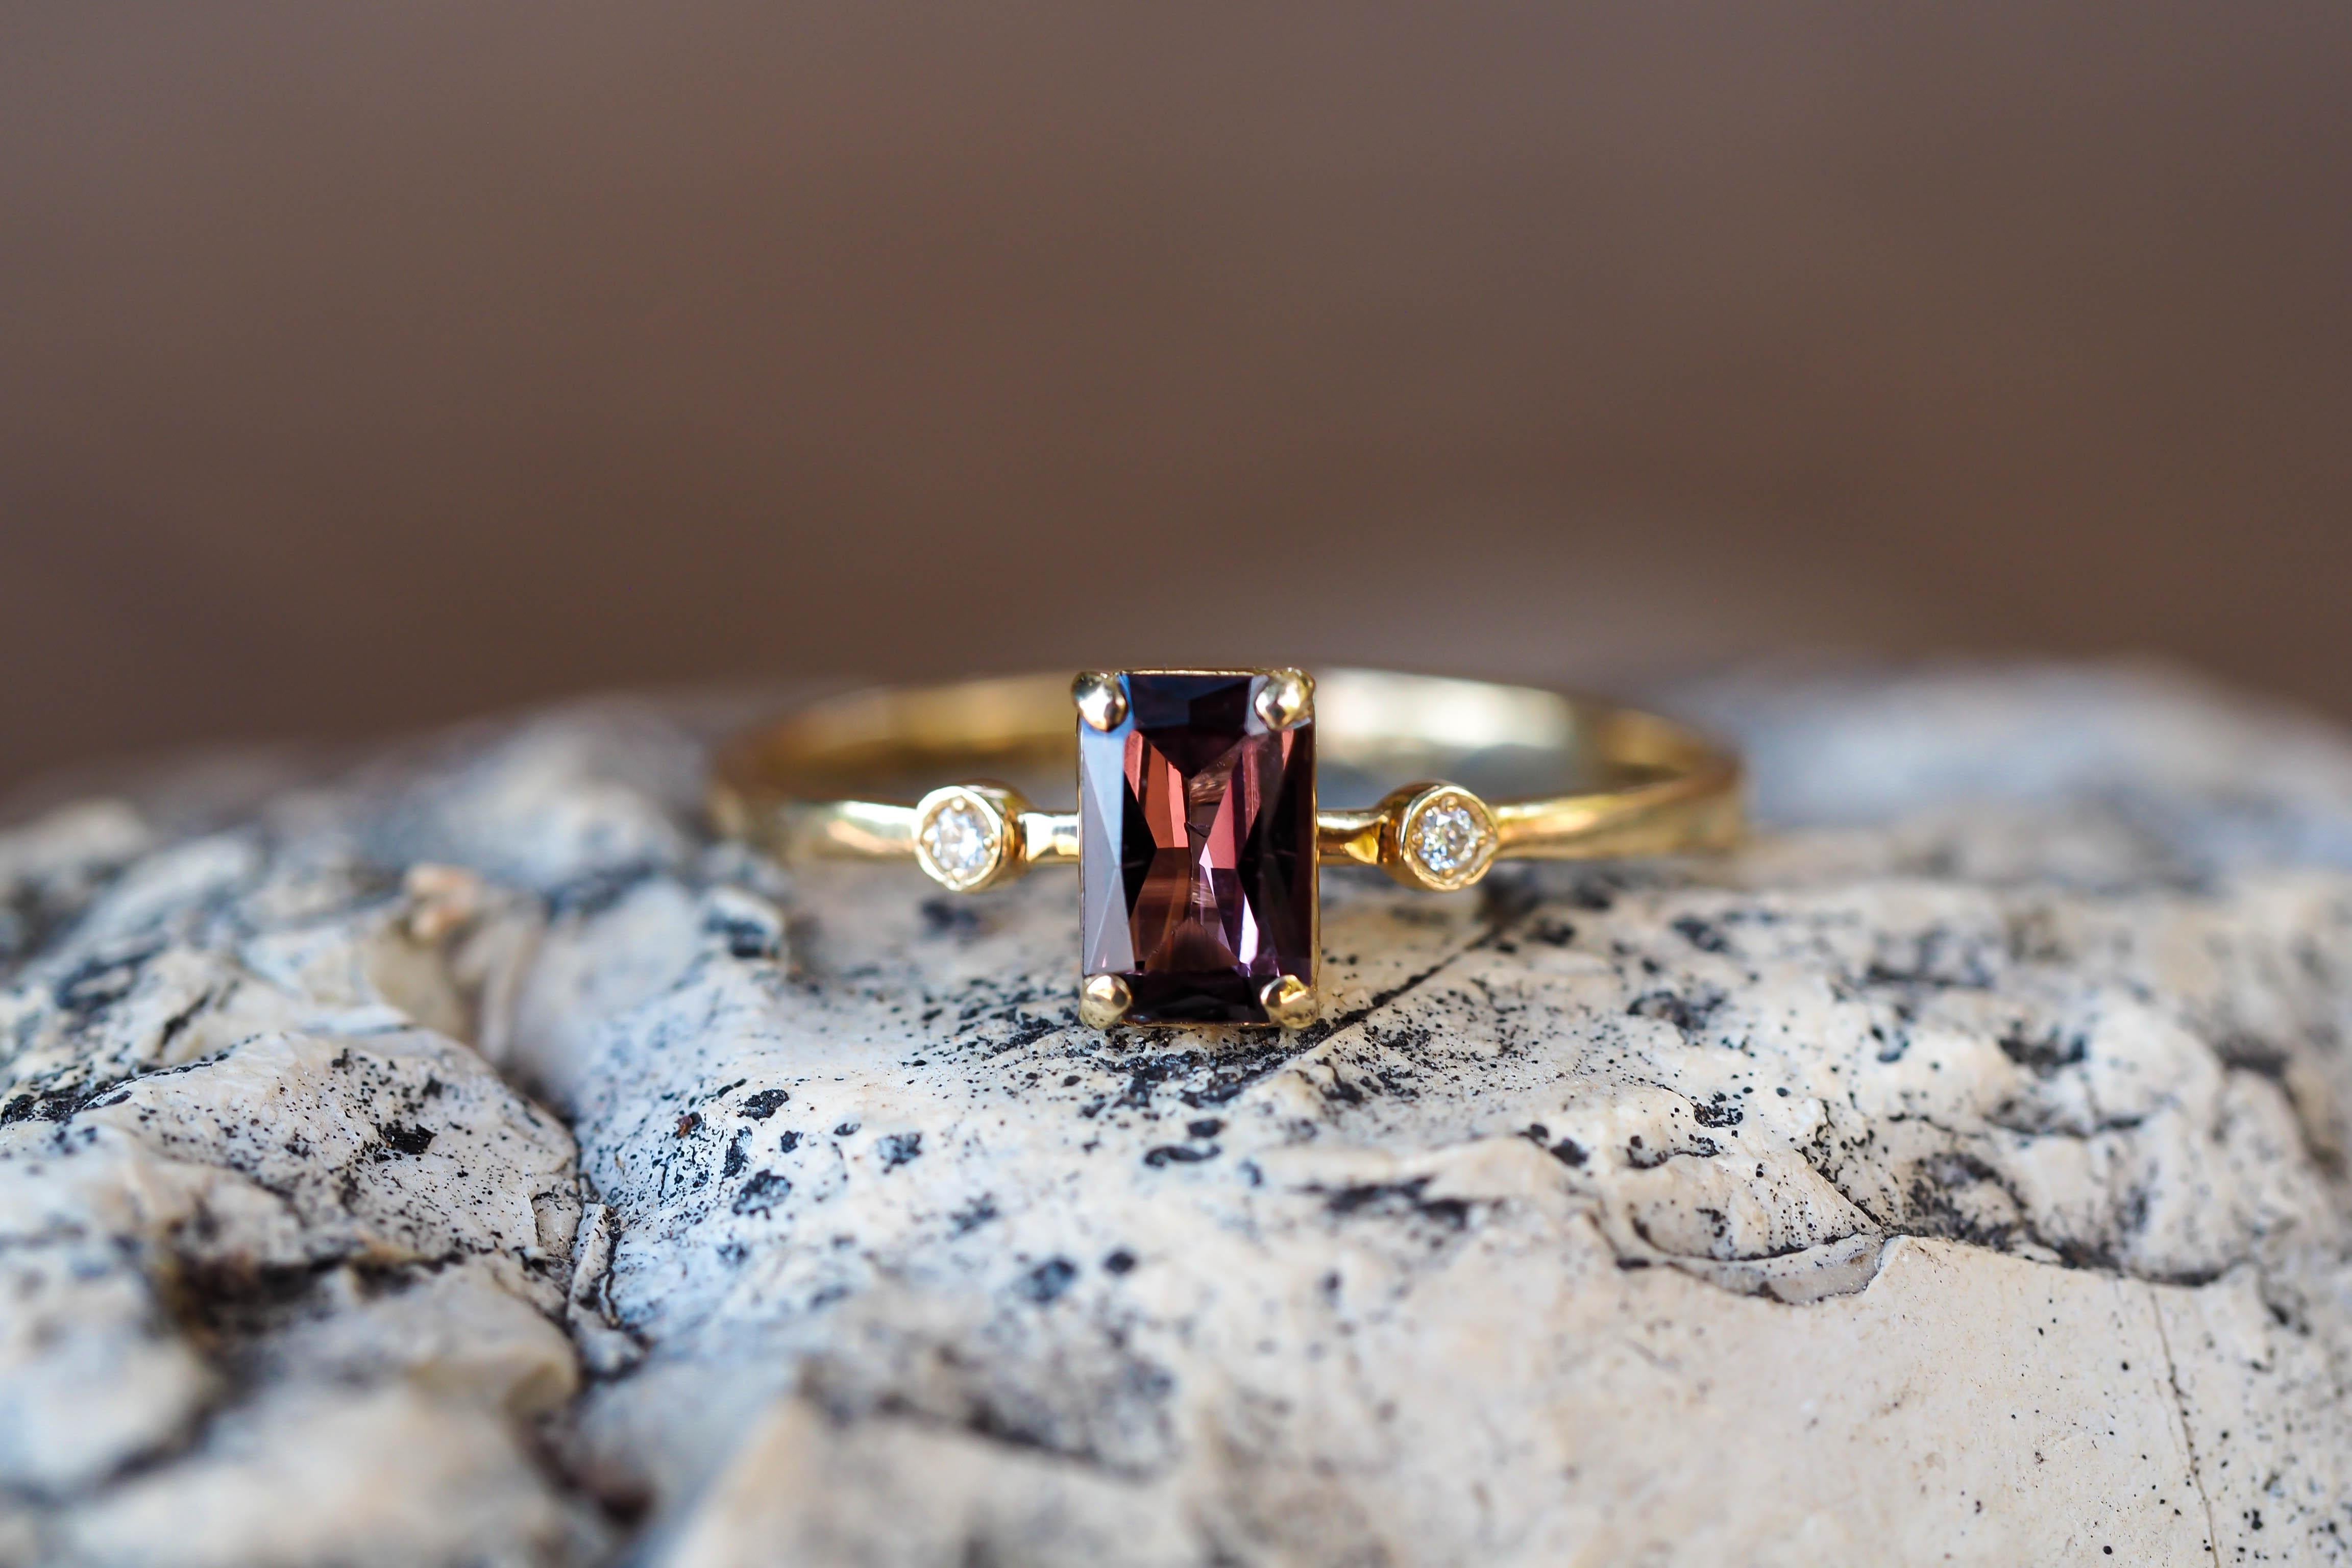 Spinel 14k gold ring. 
Octagon spinel ring. Pink, peach spinel ring. Gemstone stacking ring. Minimalist spinel ring. Spinel tiny ring.

Metal: 14k gold
Weight: 1.30 g. depends from size.
 
Spinel: color - pink, peach pink
Emerald cut, 0.80 ct.